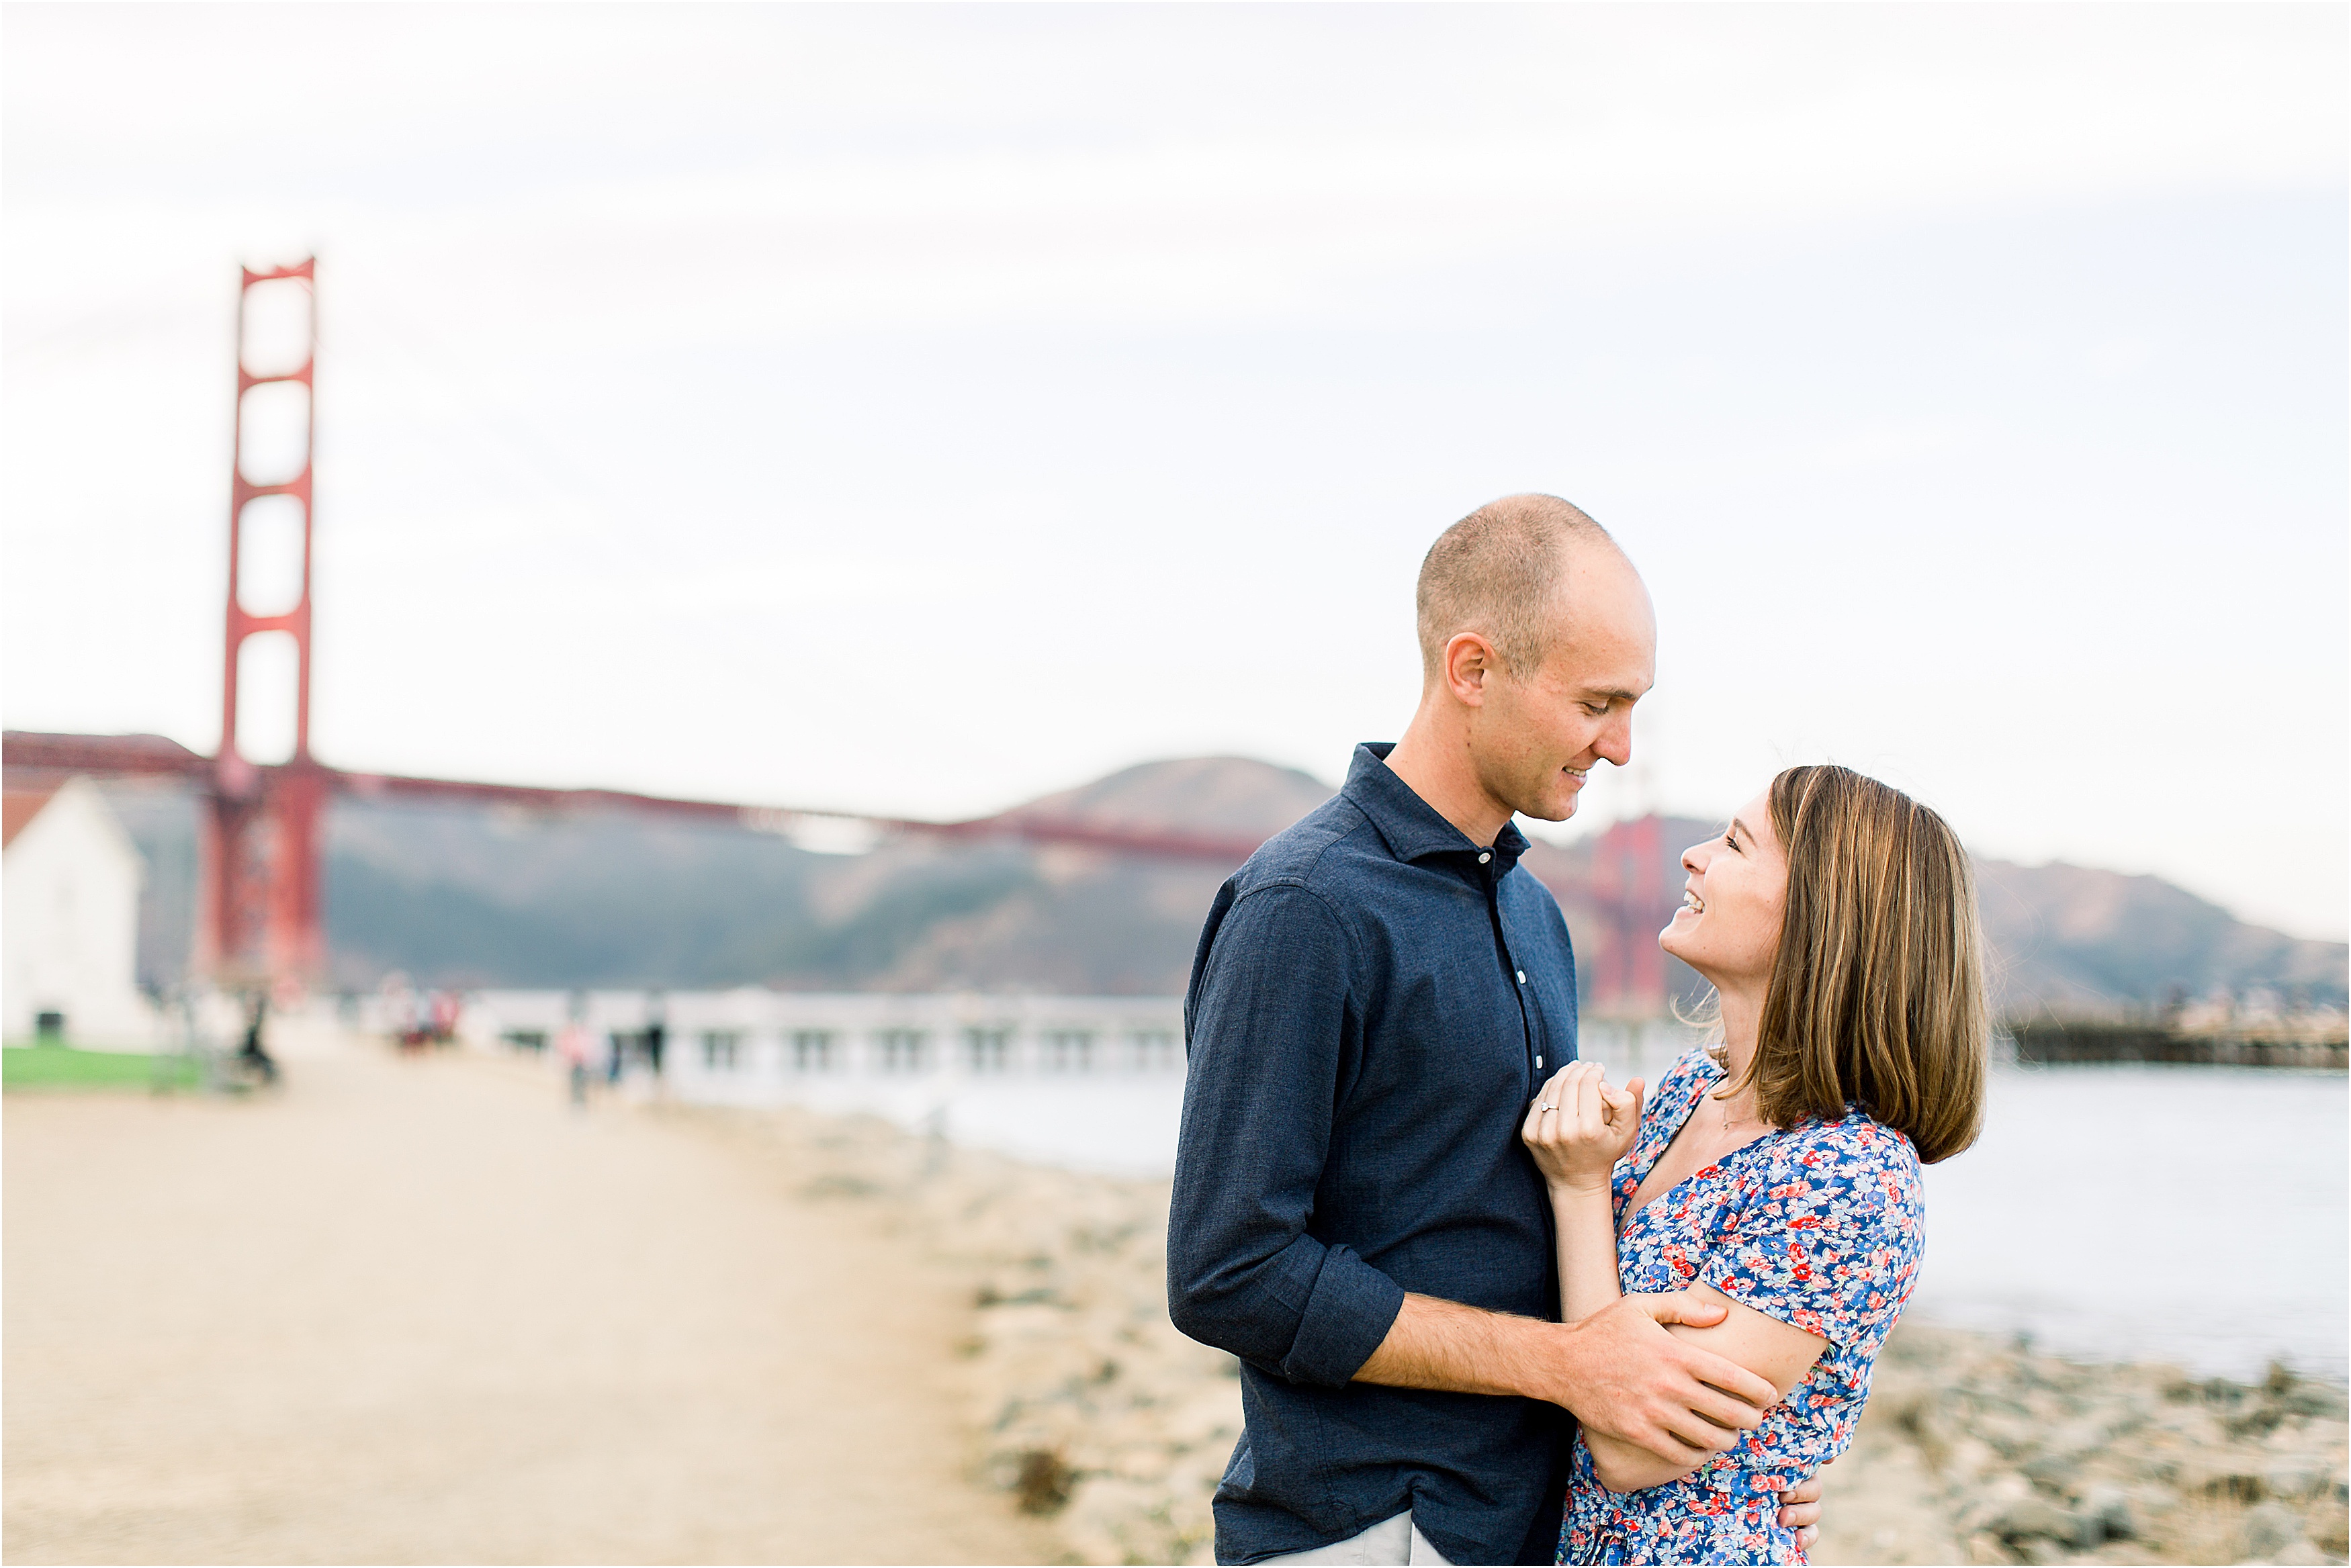 San Francisco Engagement Session by Amy Jordan Photography